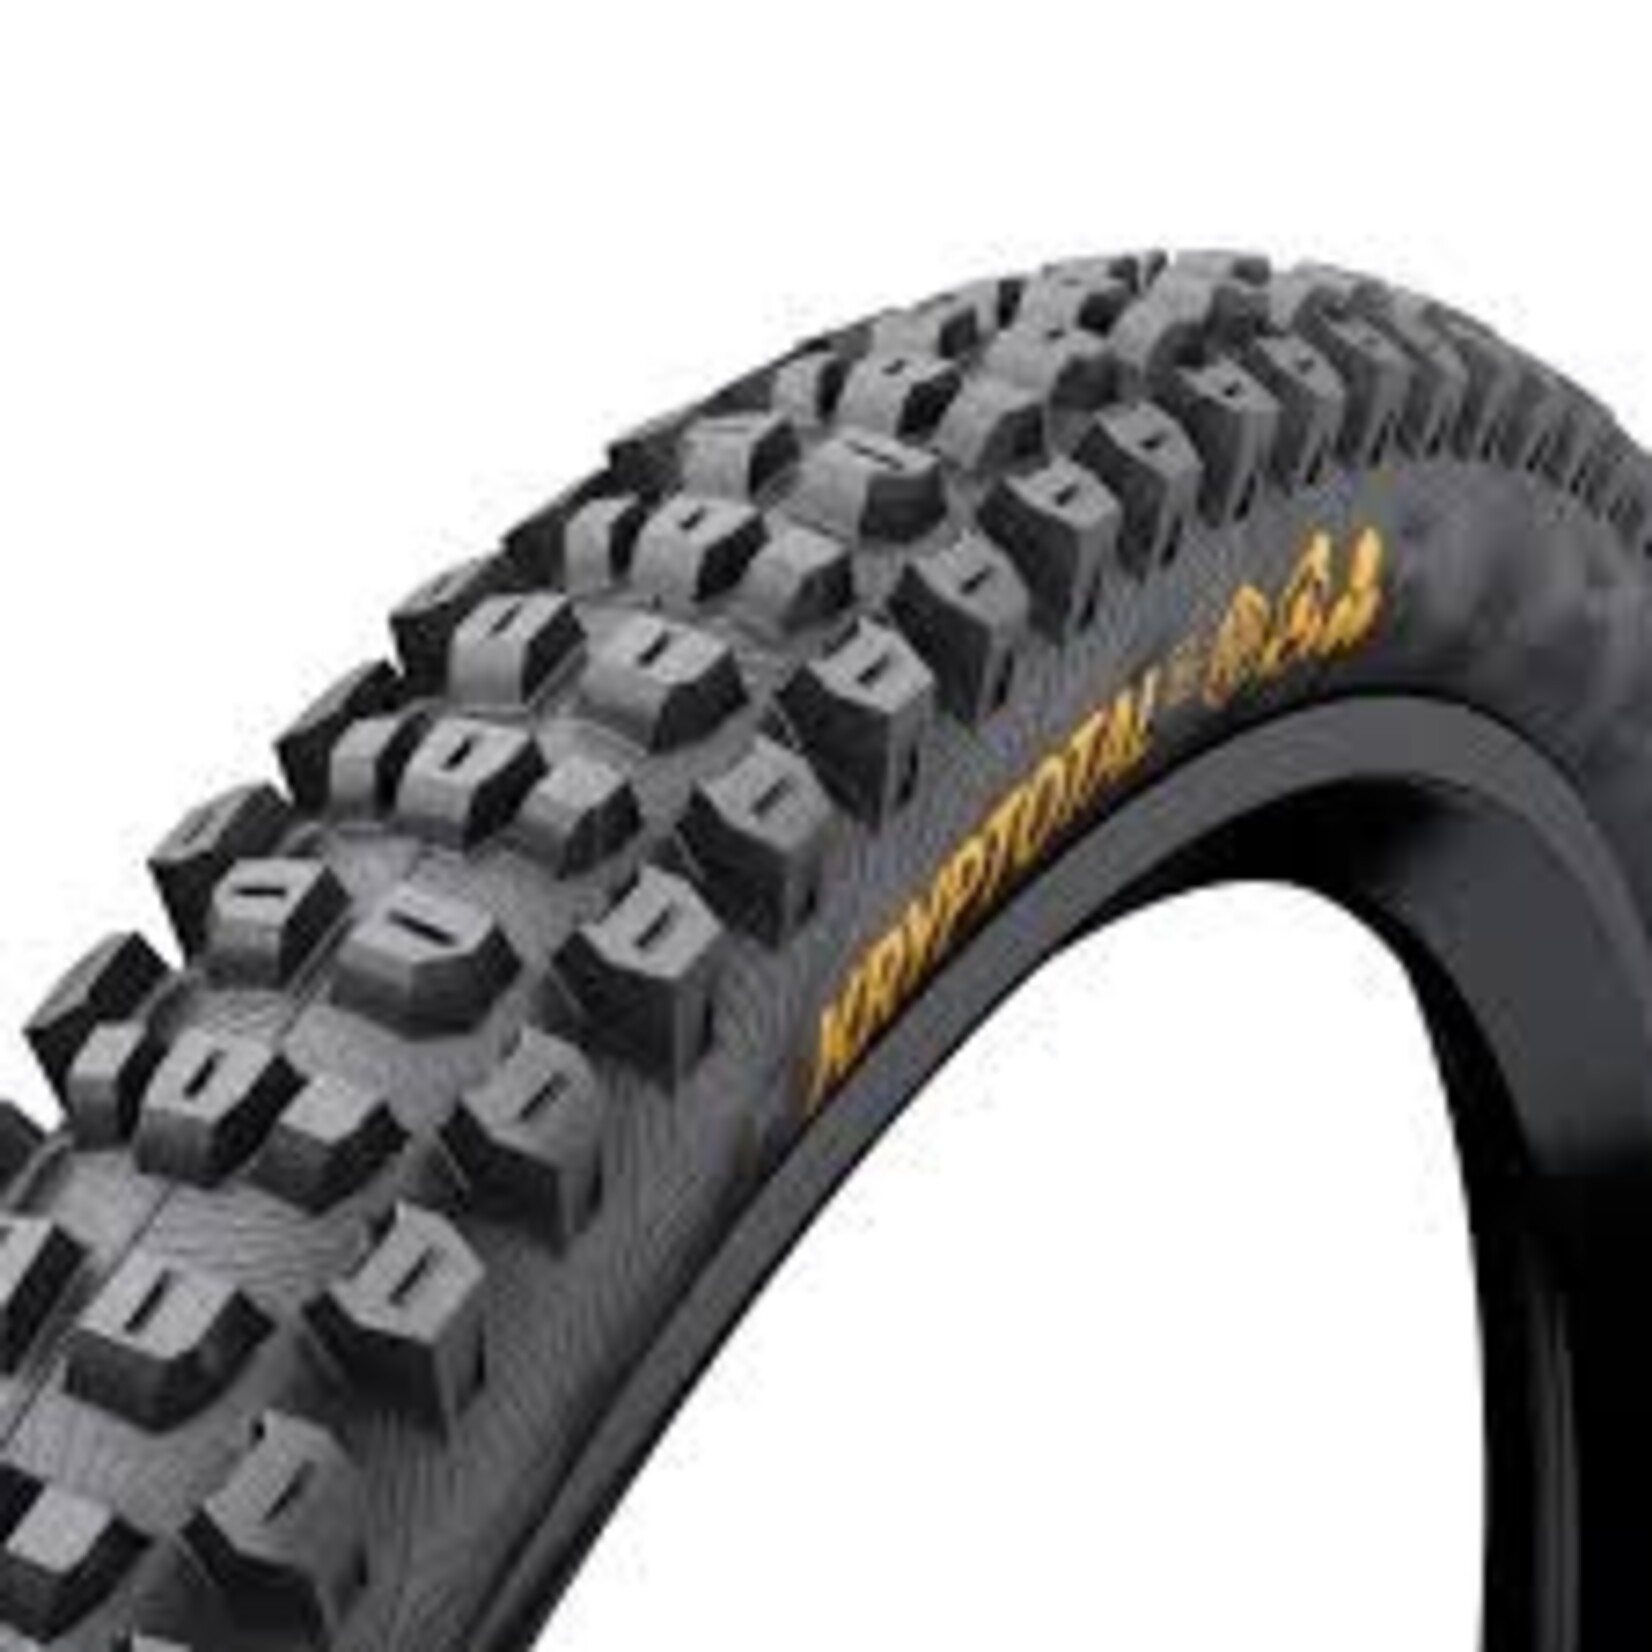 Continental Continental Kryptotal Front Tire - 27.5 x 2.40, Tubeless, Folding, Black, Soft, Enduro Casing, E25